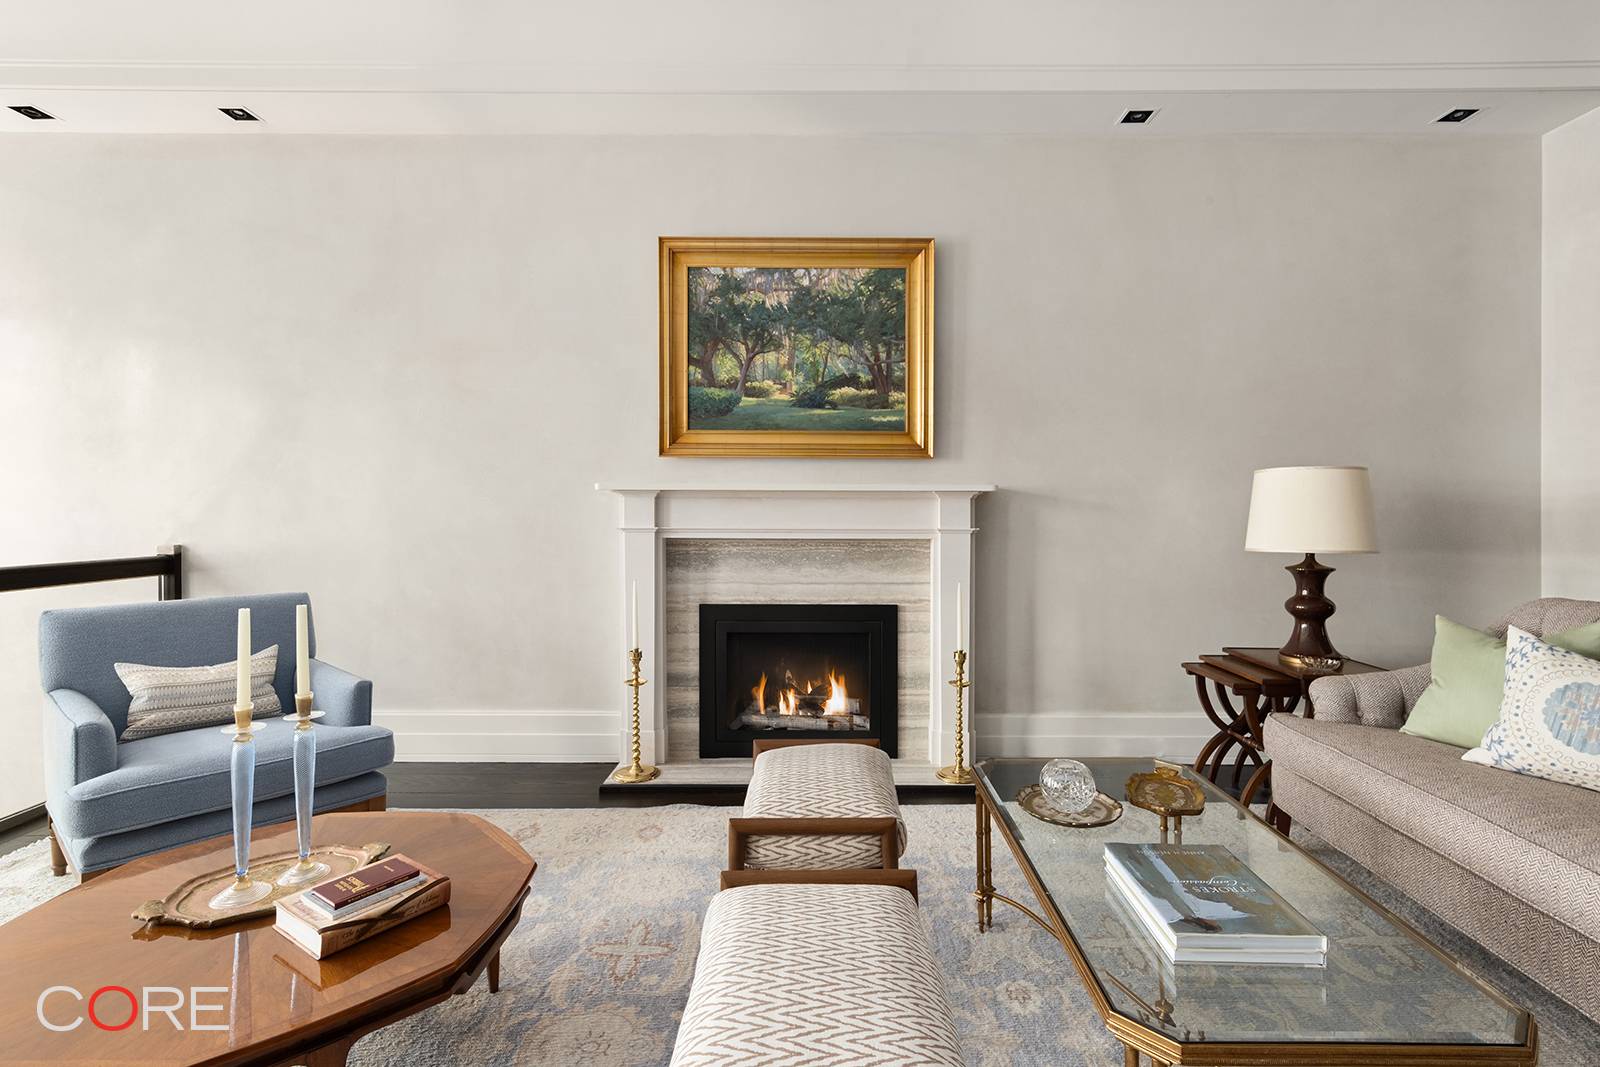 Situated on a coveted, tree lined block on the Upper East Side, 238 East 68th Street is a sophisticated five story single family townhouse offering grand scale, radiant light, and ...